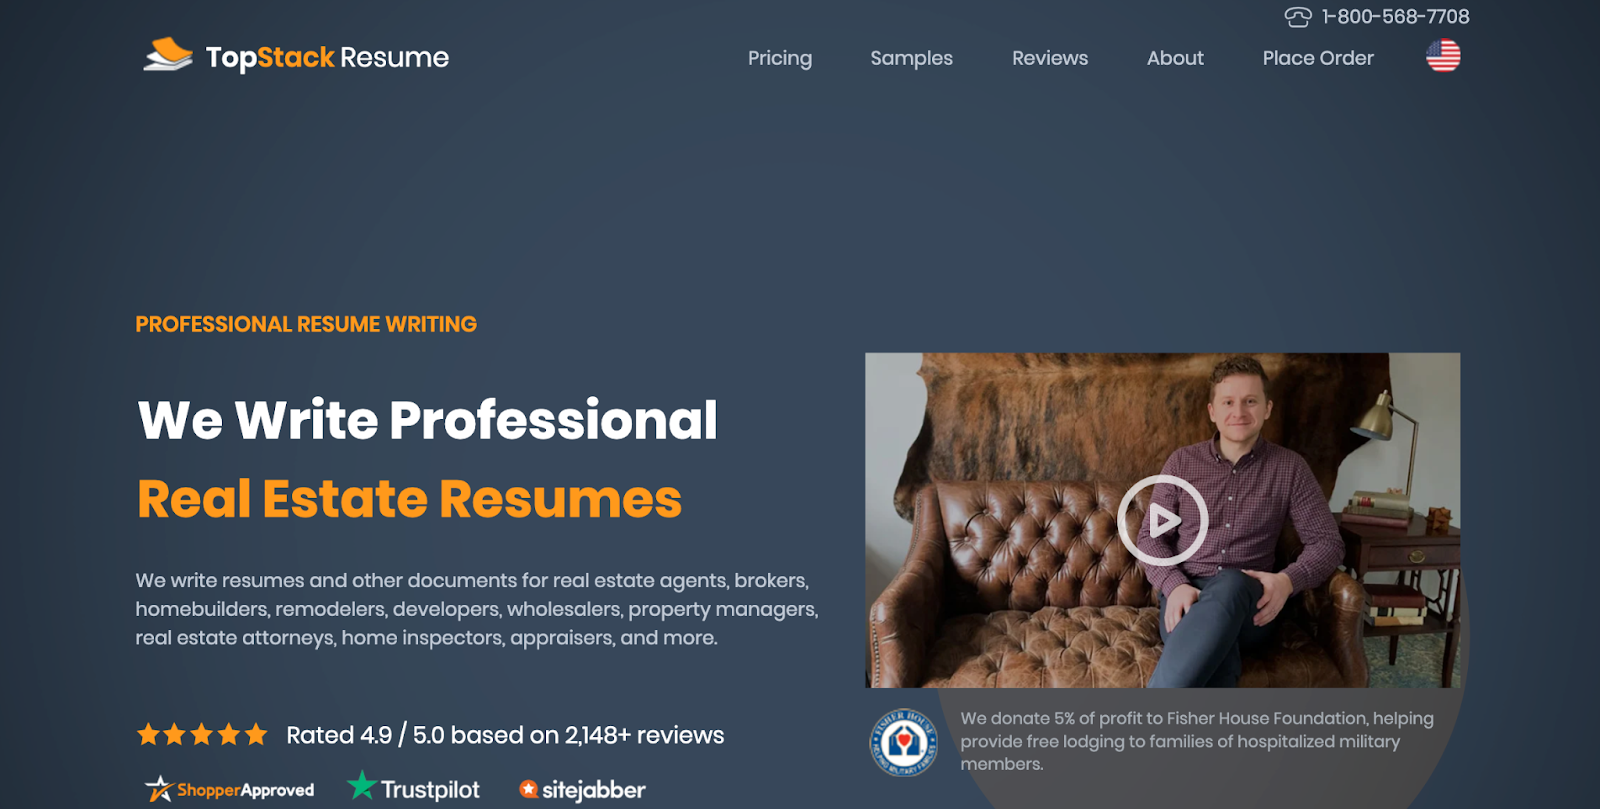 Topstack Resume Hero Section Resume Writing Services For Real Estate